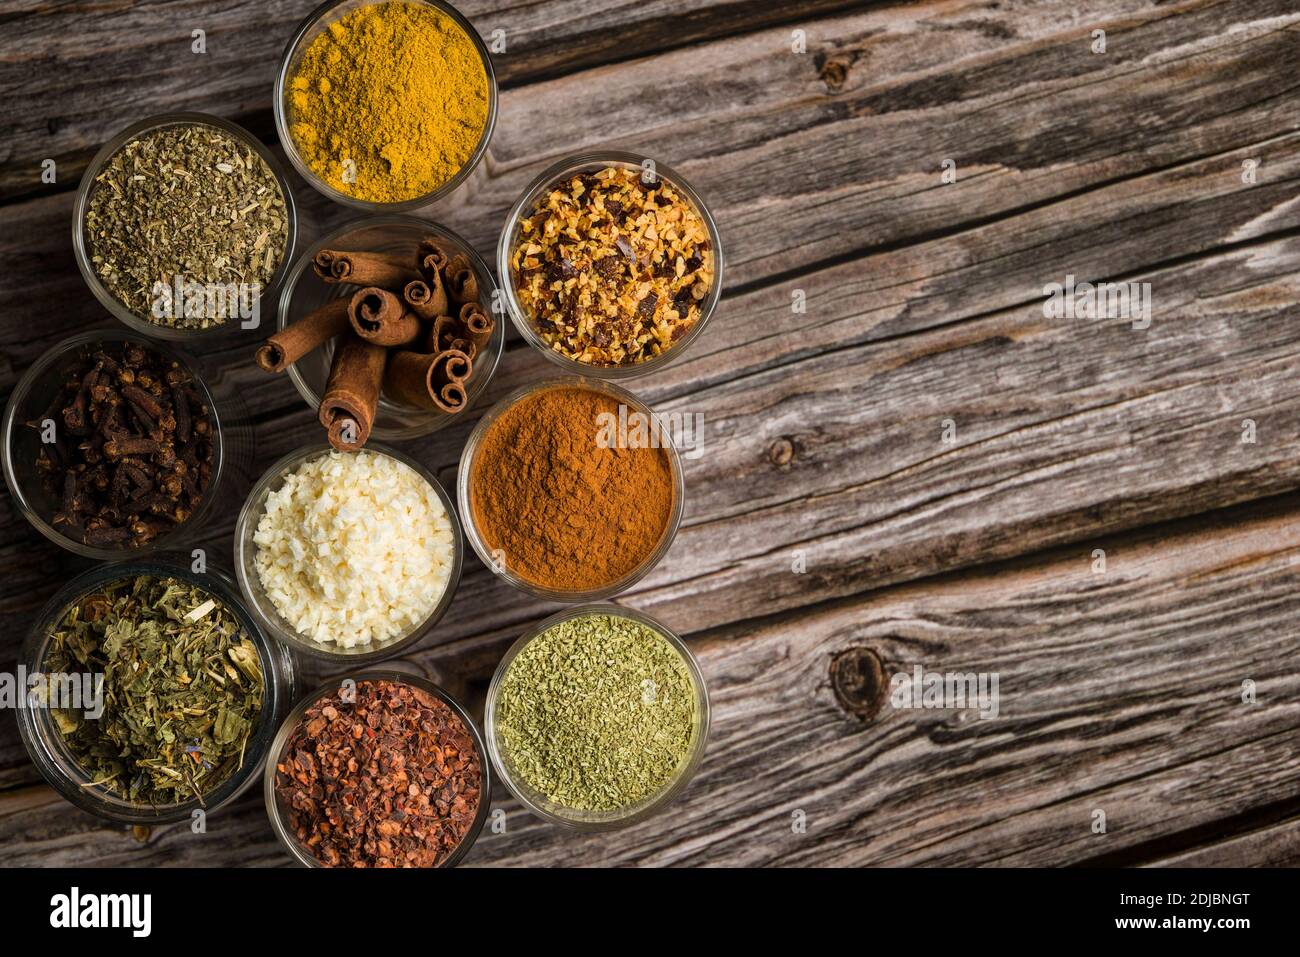 top view of glass jars with various spices on wooden table Stock Photo